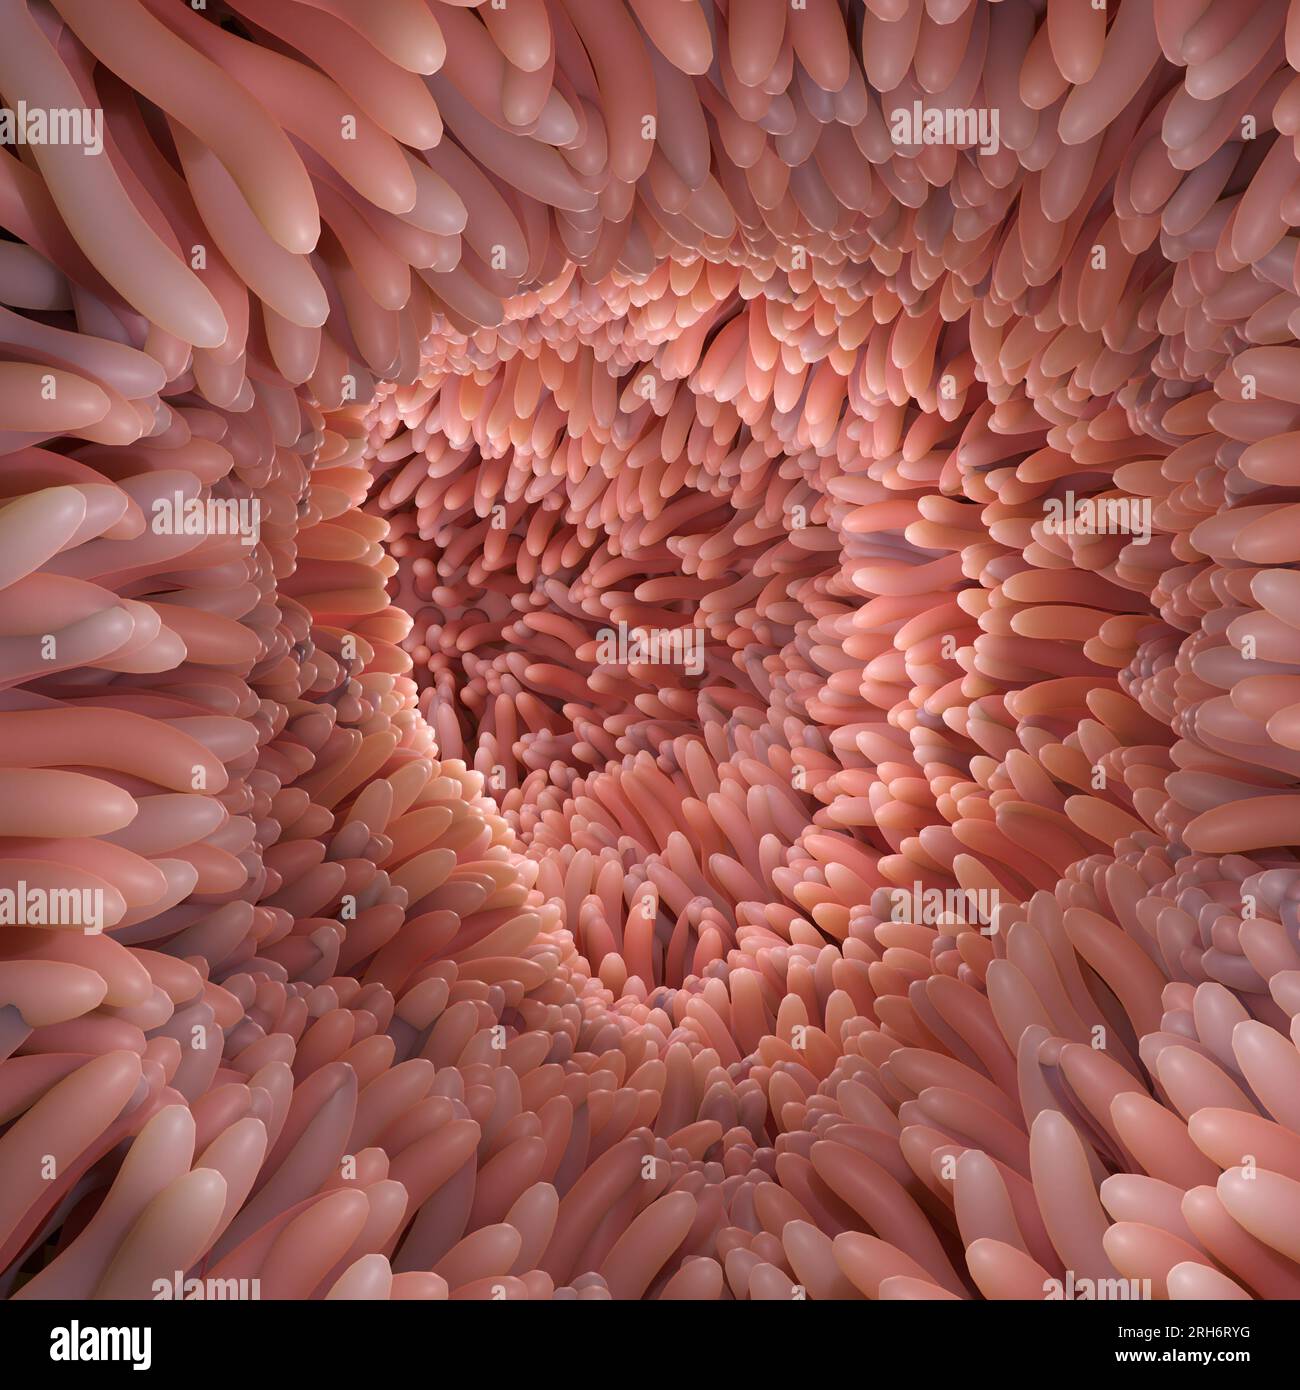 3D Rendering medically accurate illustration of intestinal villi. Red microvilli in a intestinal tract Stock Photo